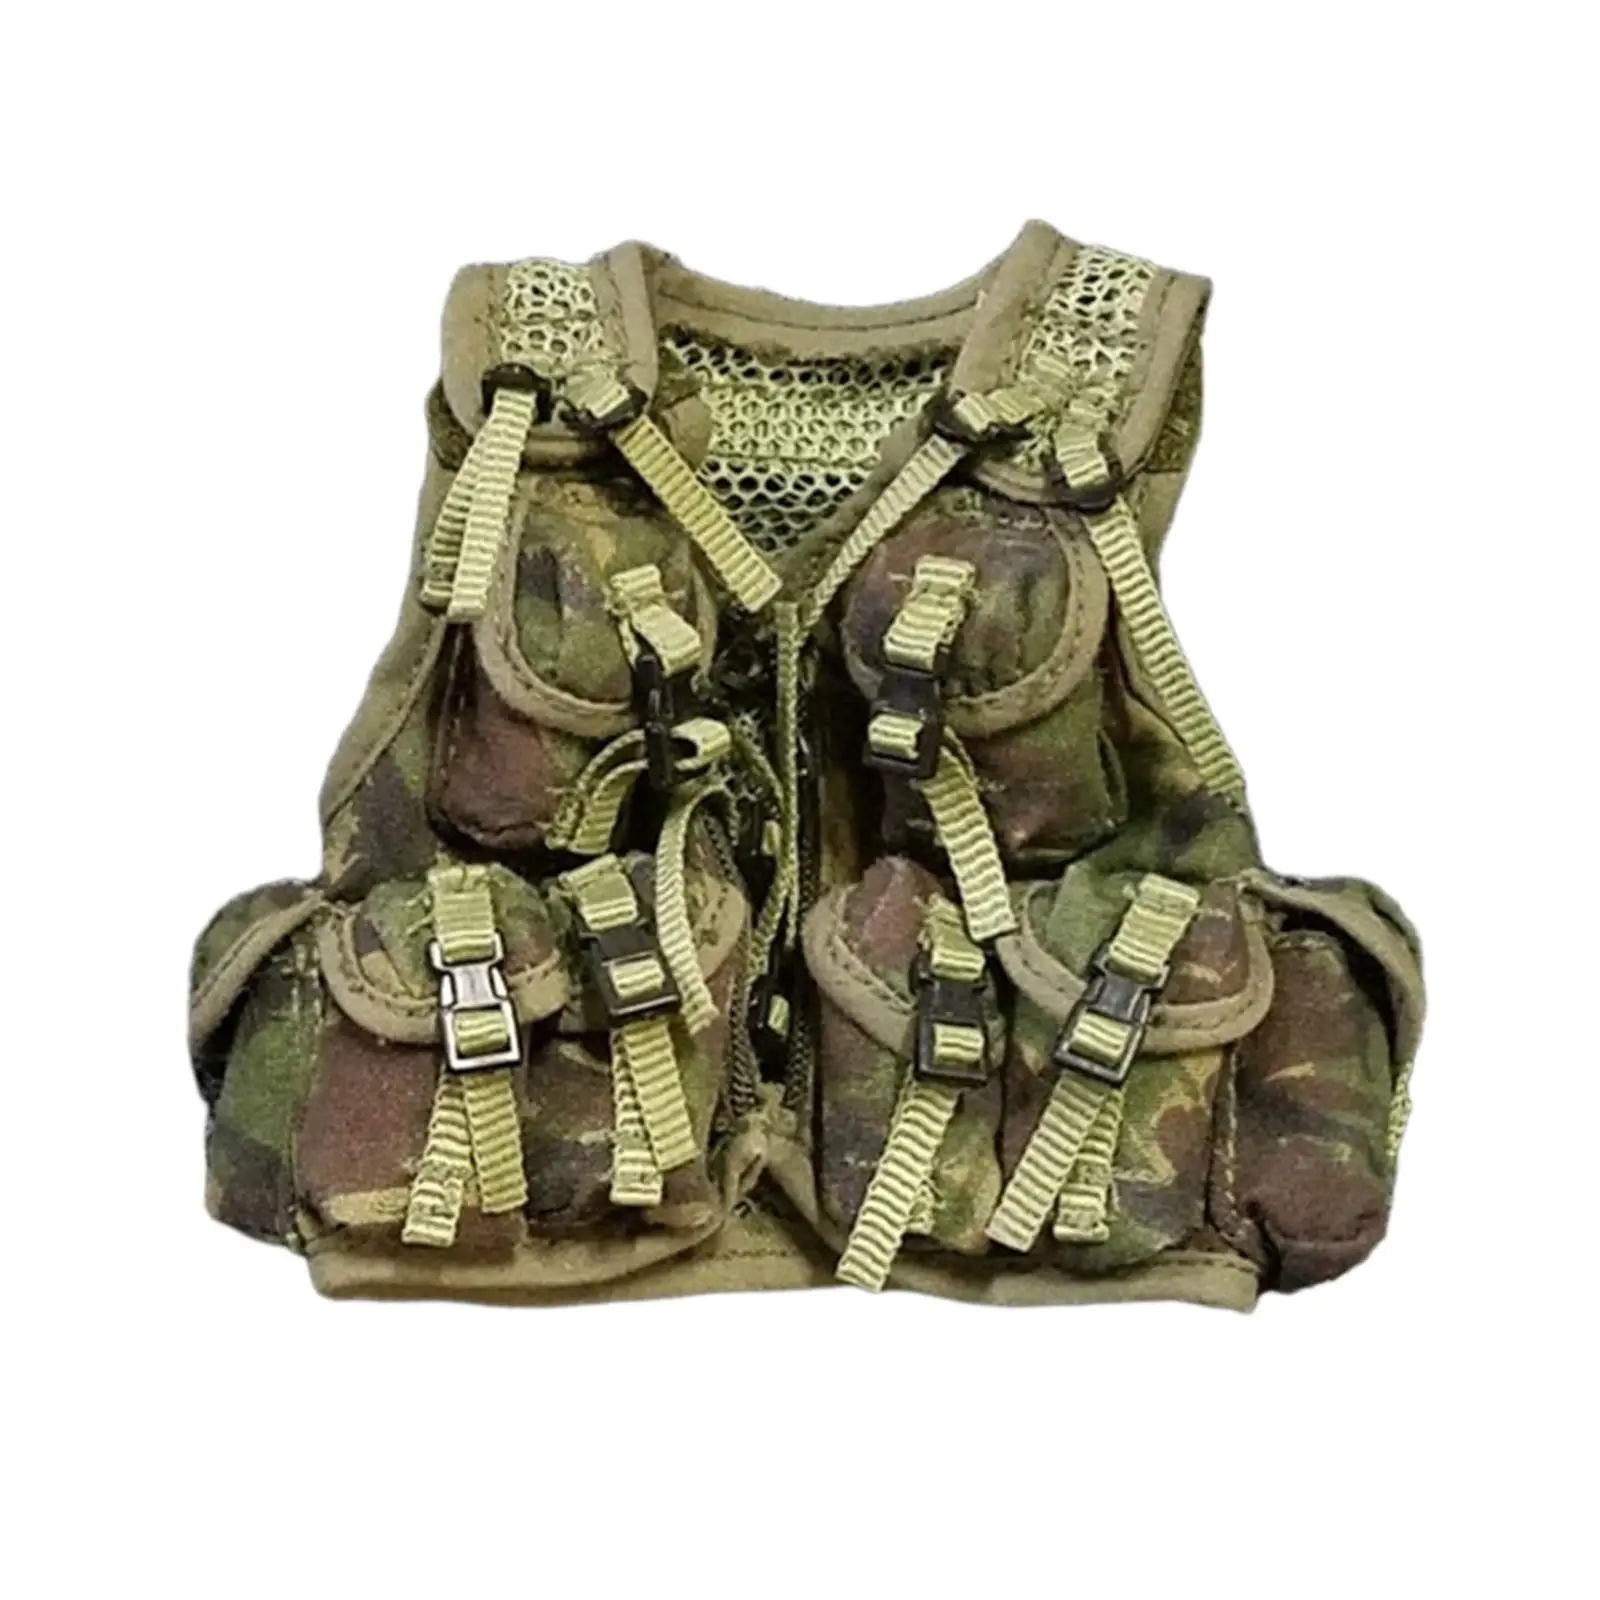 1/6 Scale Miniature Doll Jungle Vest with Multi Pockets Traning Vest Clothes for 12inch Male Collectable Action Figures Dress up